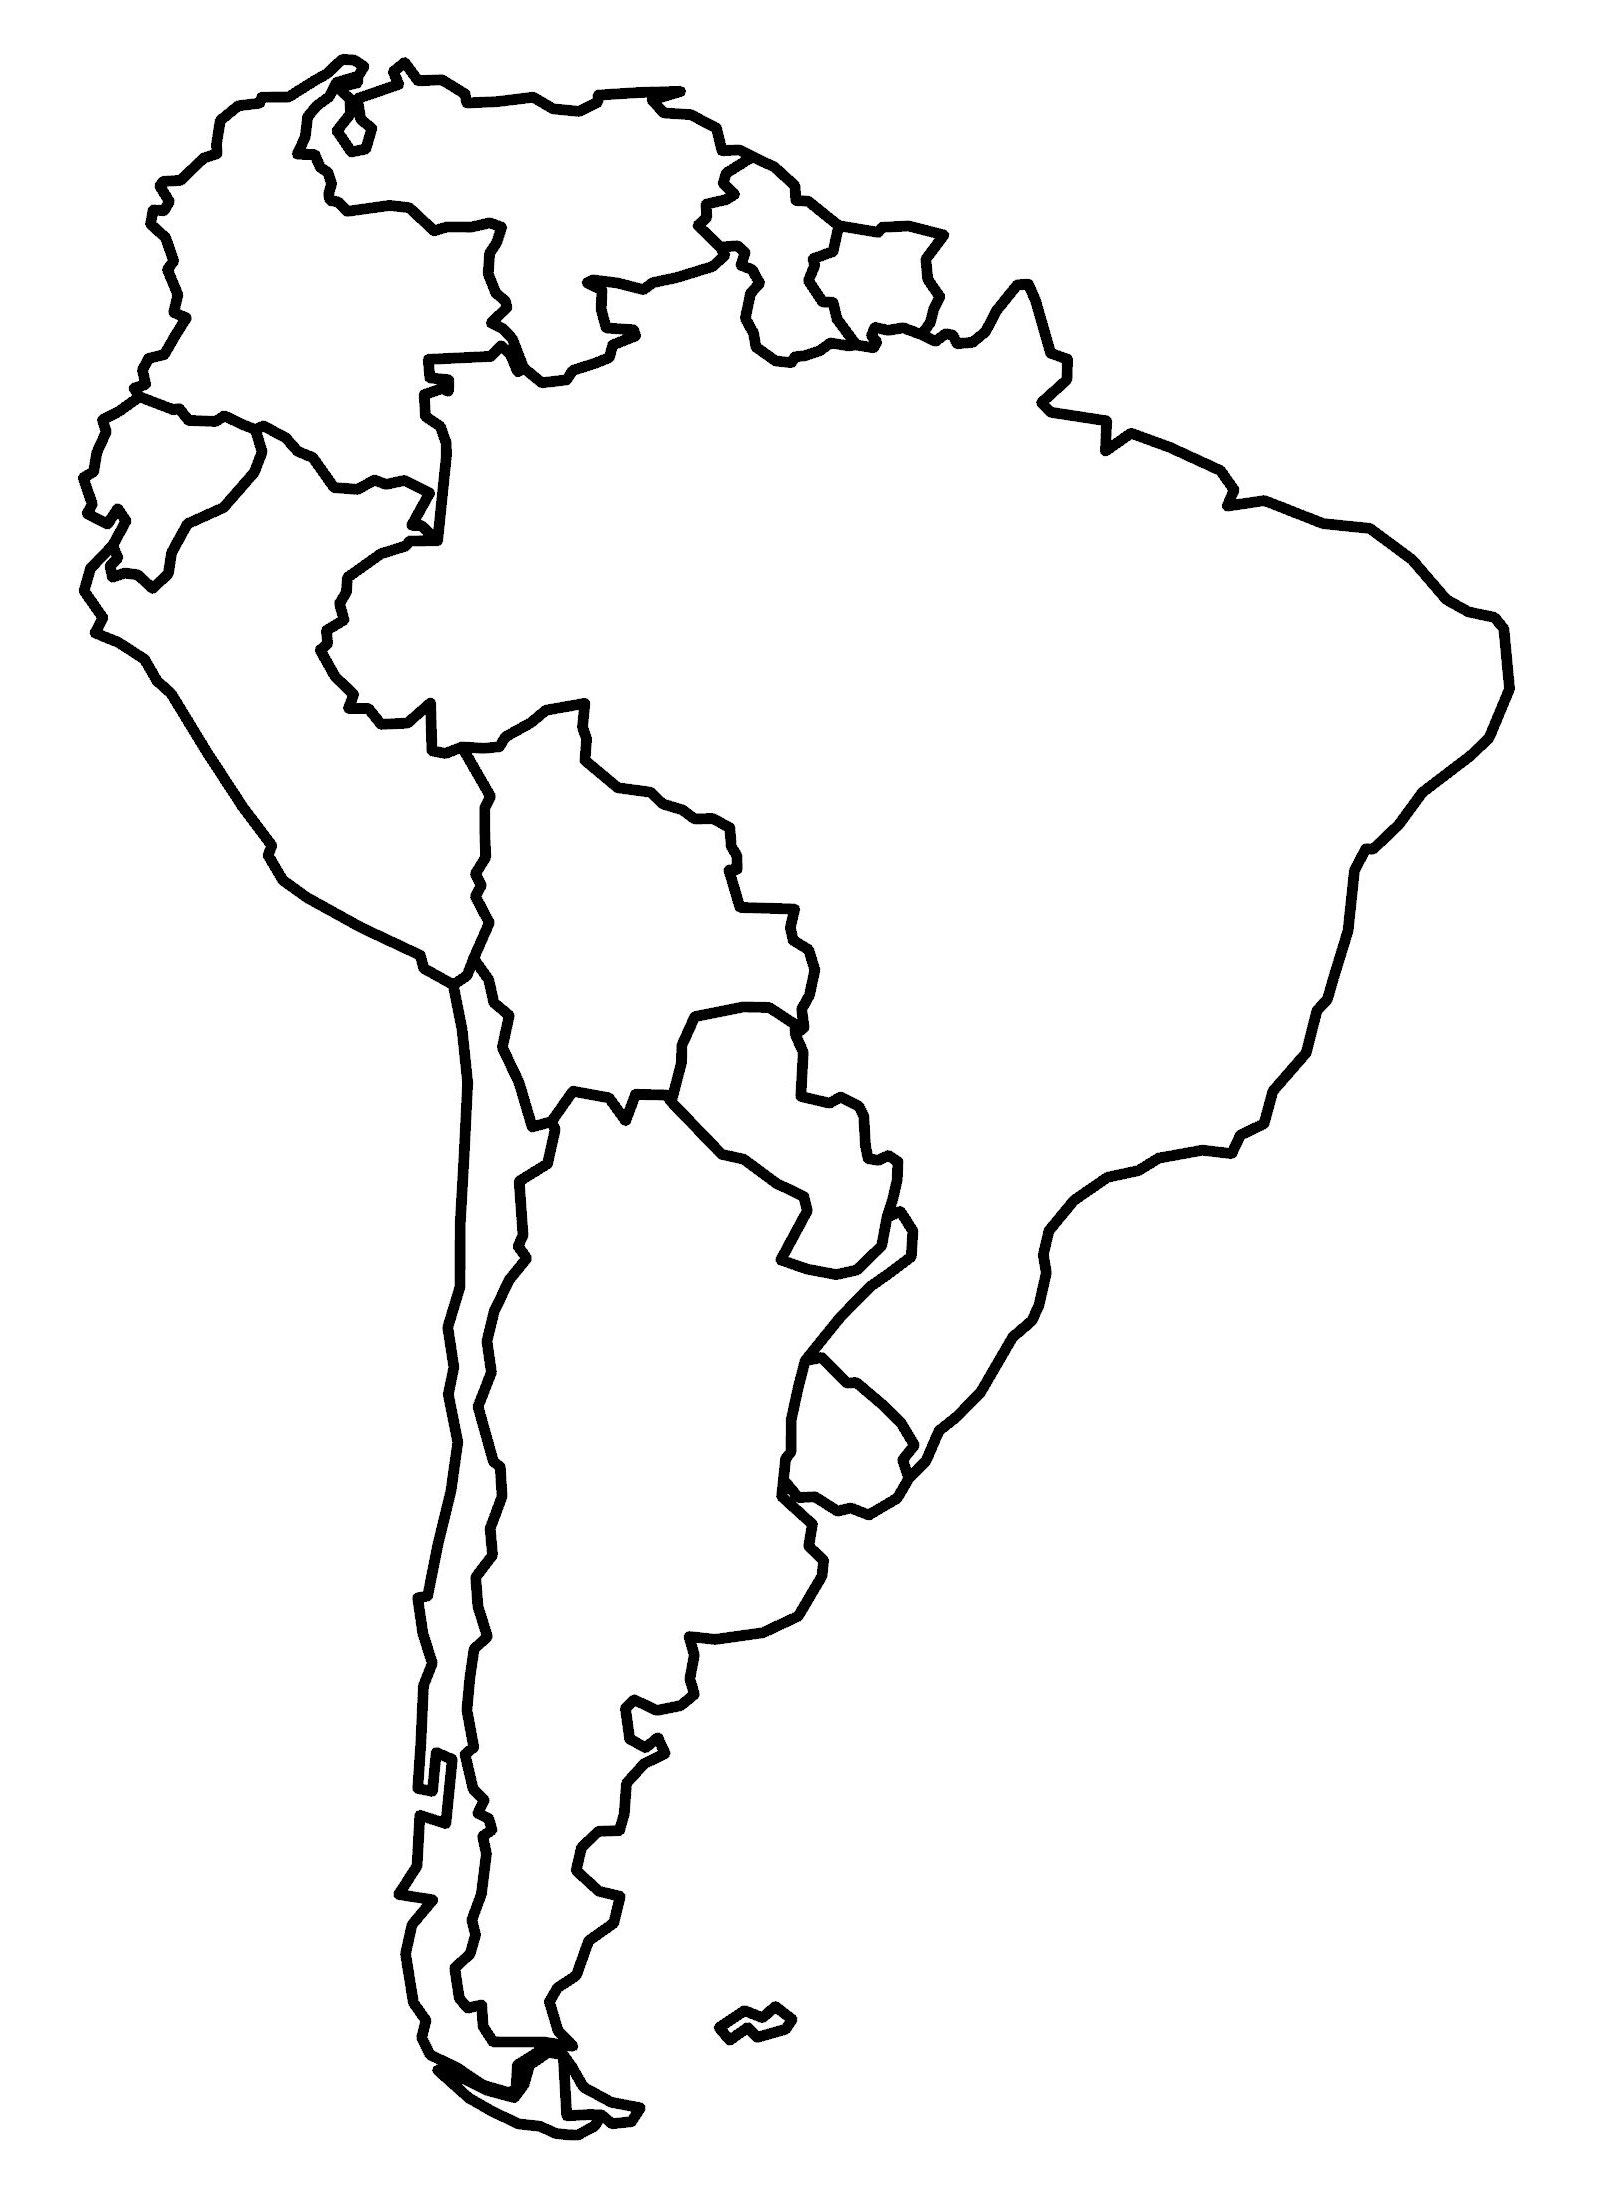 South America Blank Map and Country Outlines - GIS Geography